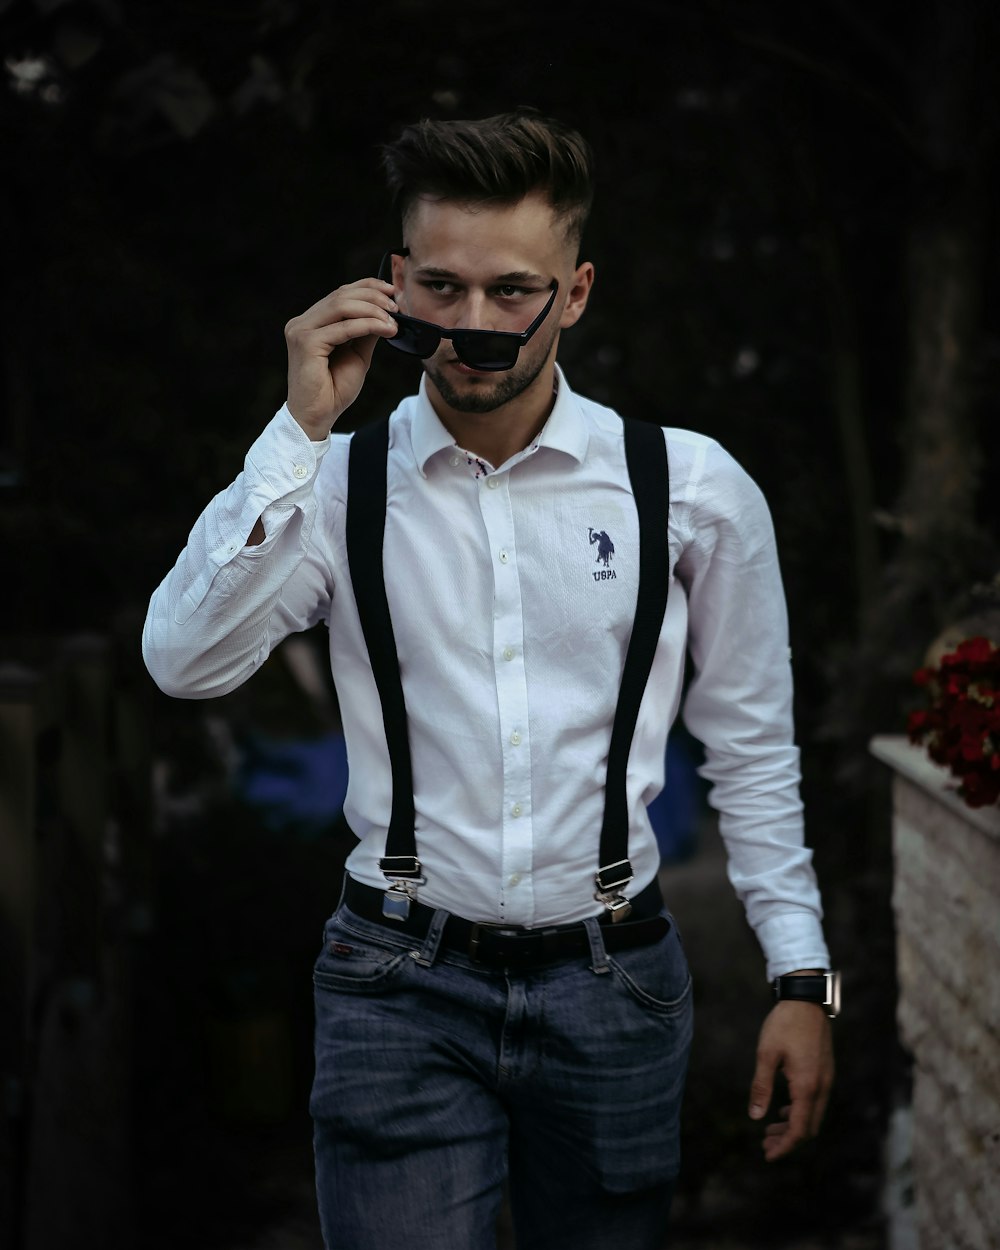 a man wearing suspenders and a white shirt